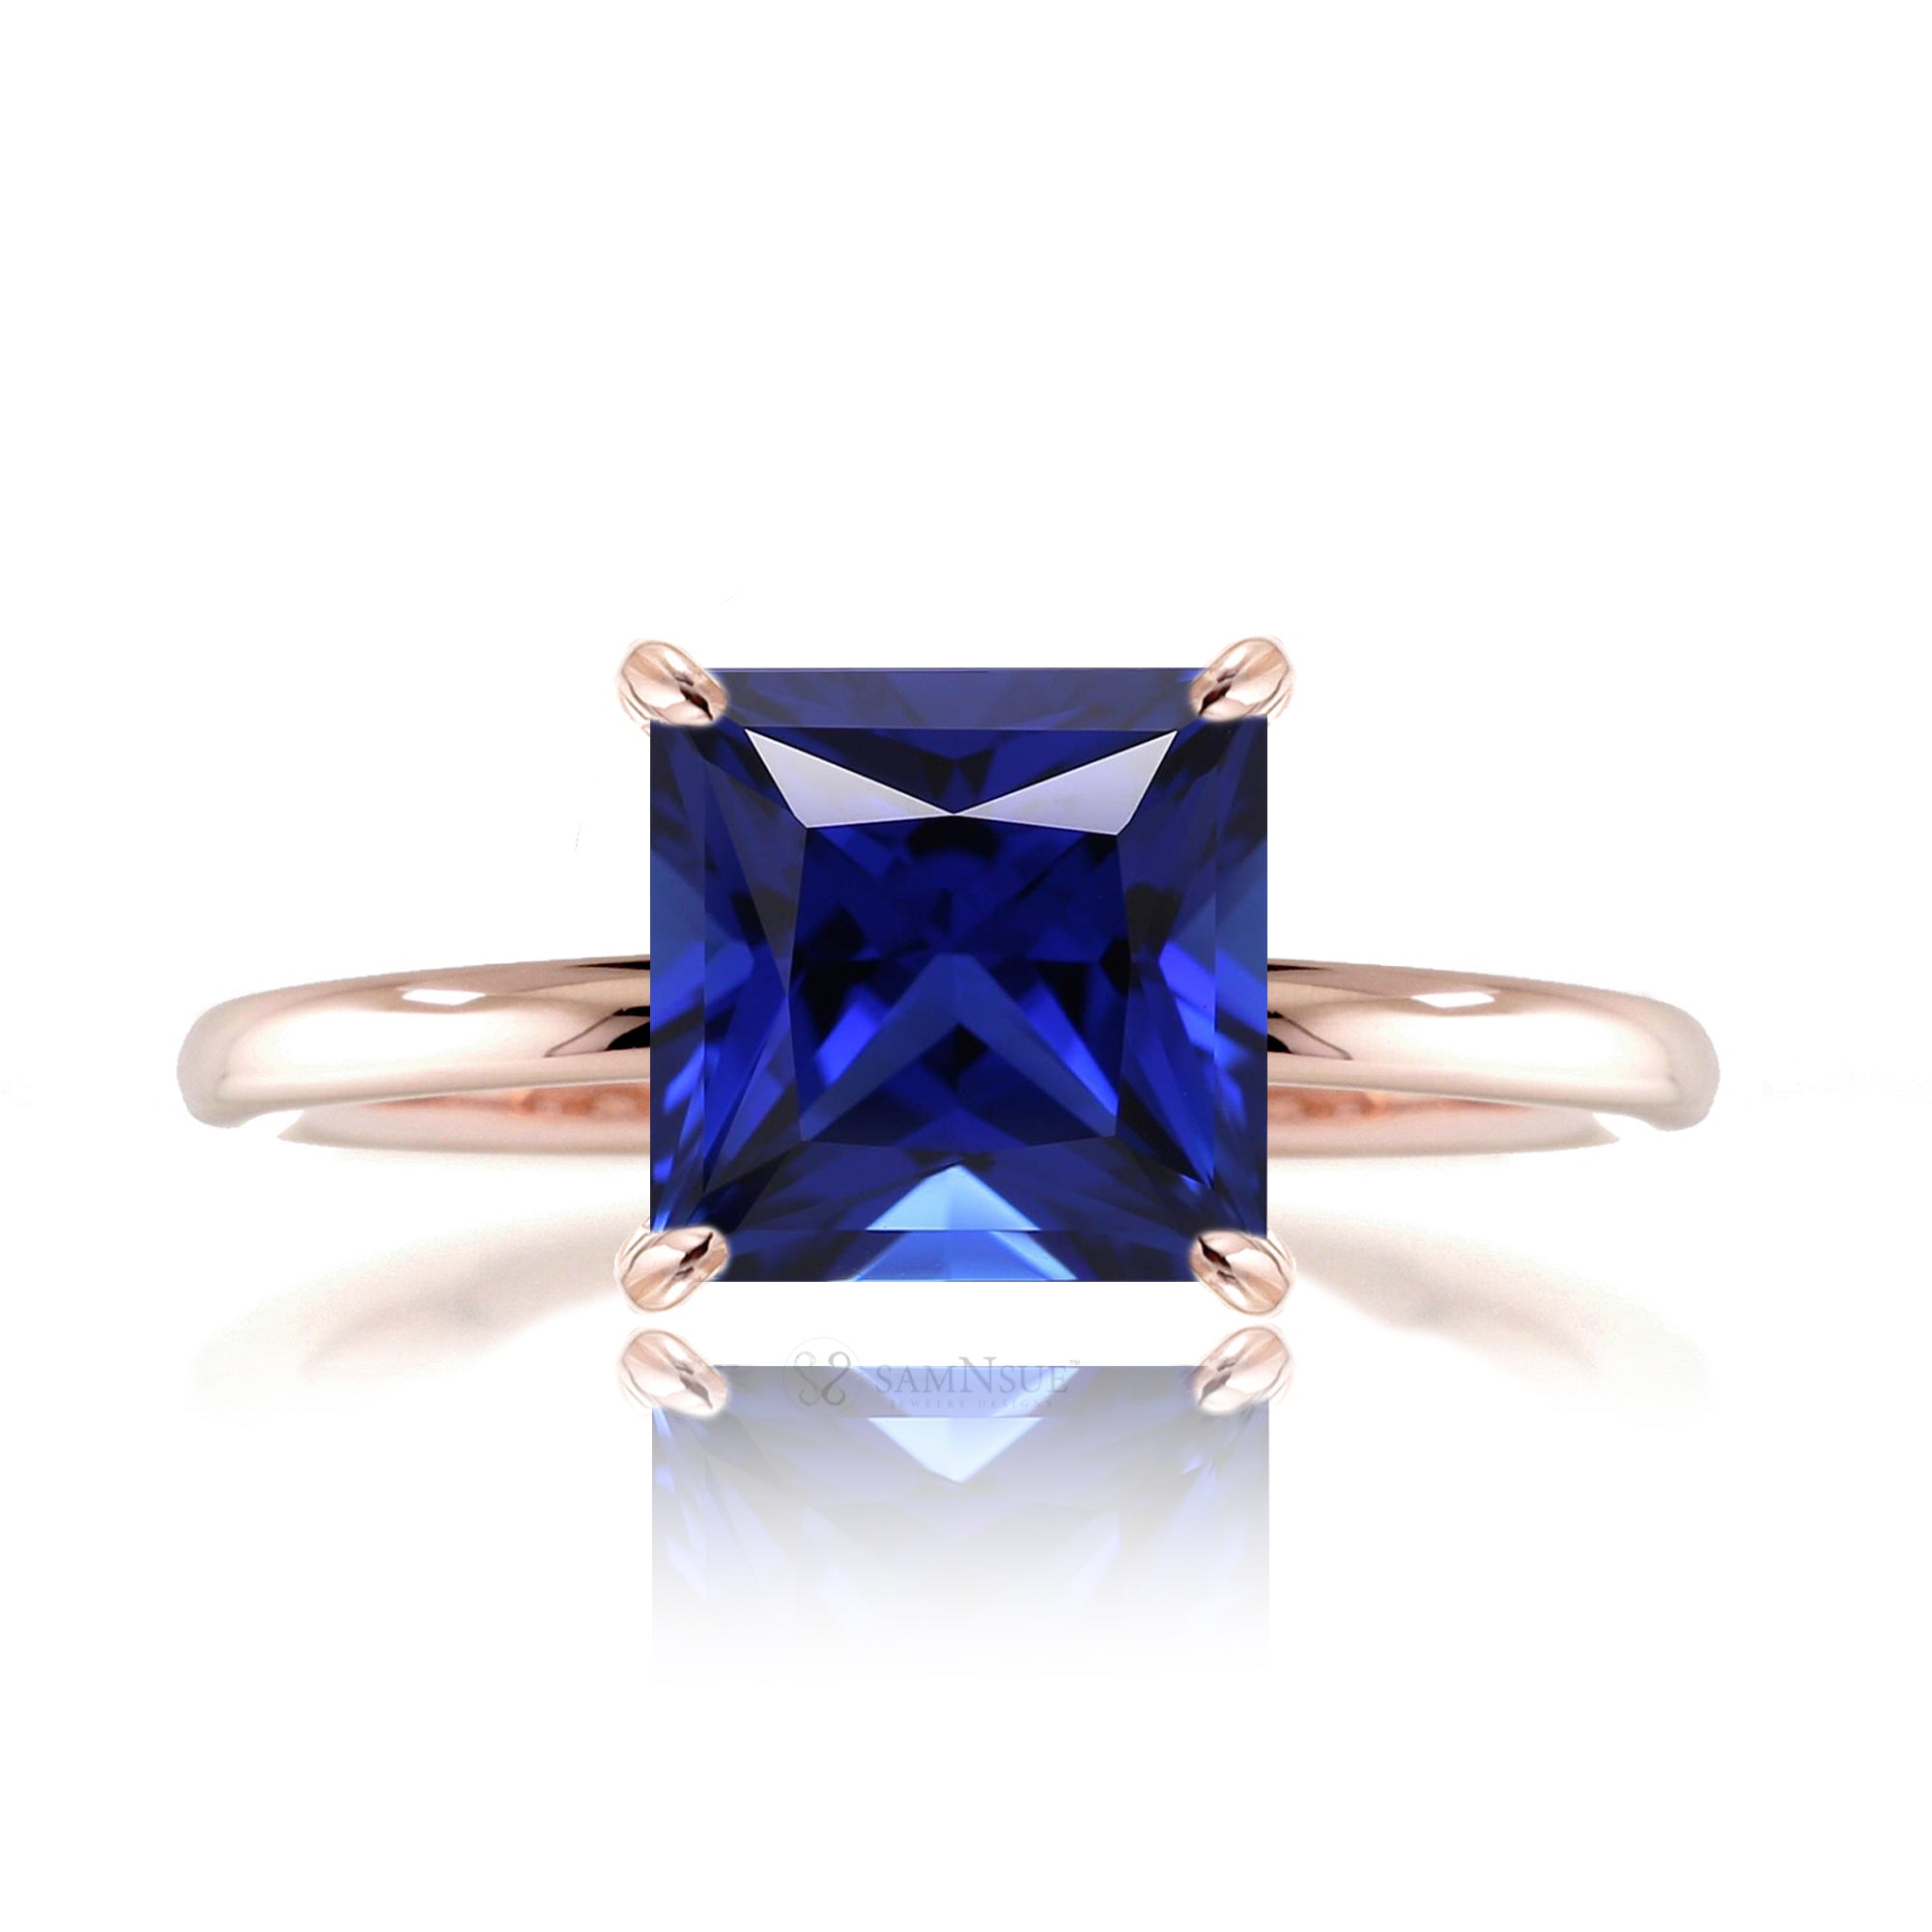 Princess cut blue sapphire diamond engagement ring rose gold solid band - the Ava